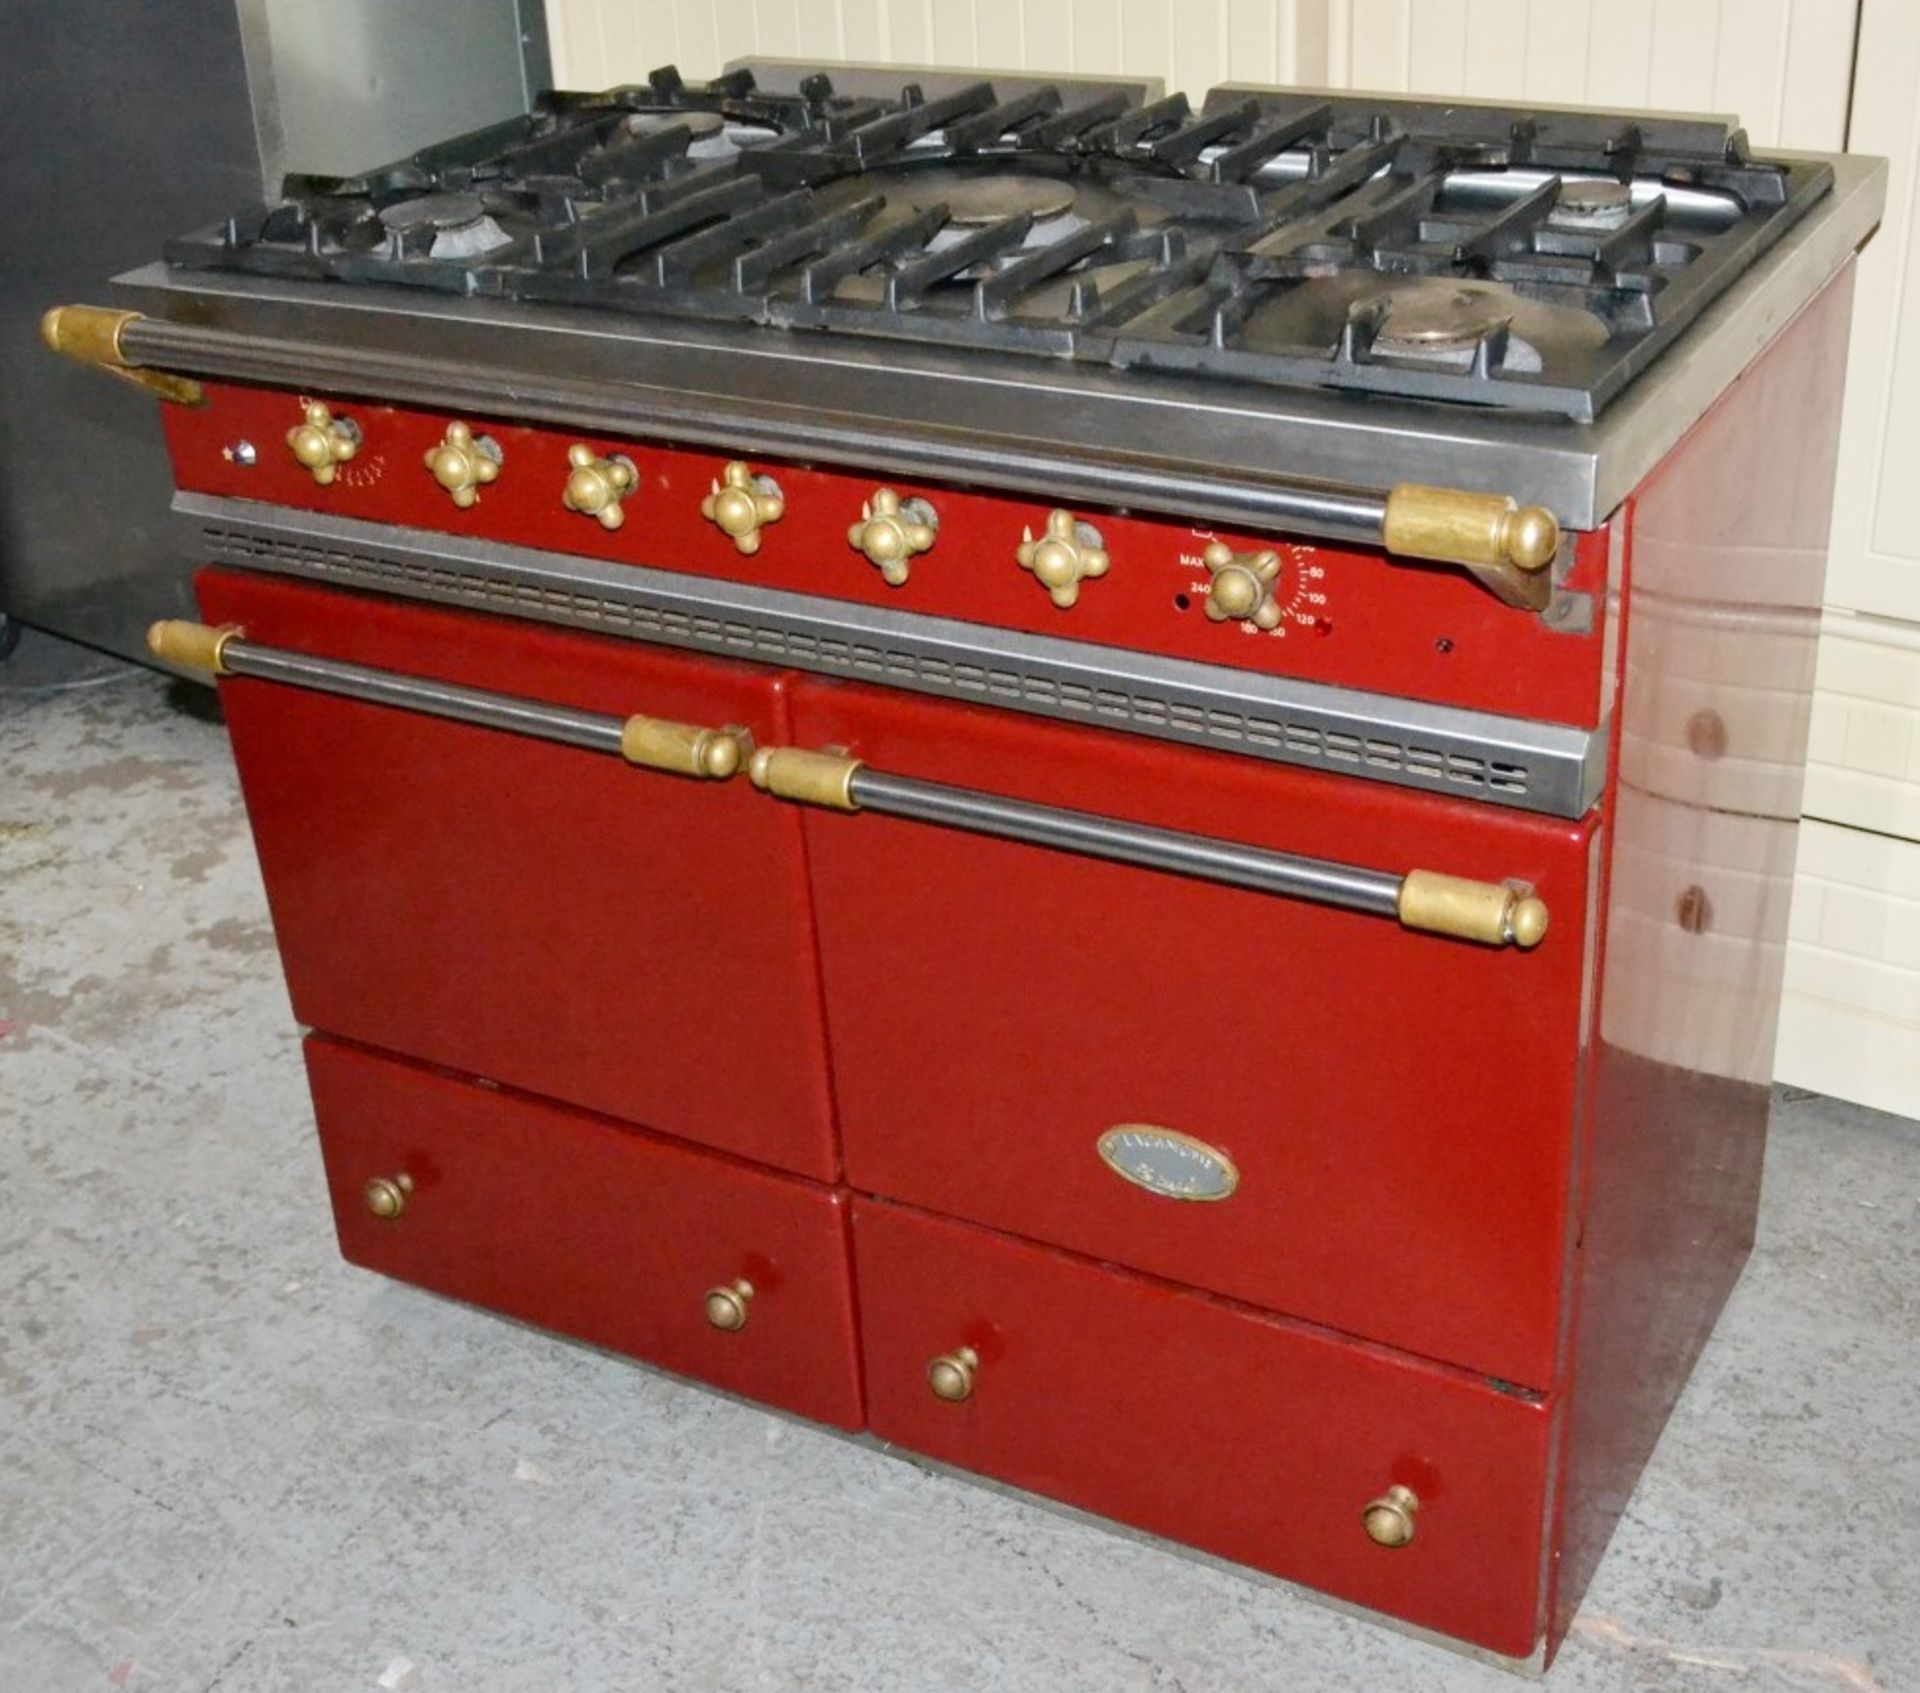 1 x Lacanche Cluny Classic 100 (Cote d'Or) Range Cooker Double Oven in Red - Dual Fuel - Used - - Image 5 of 21